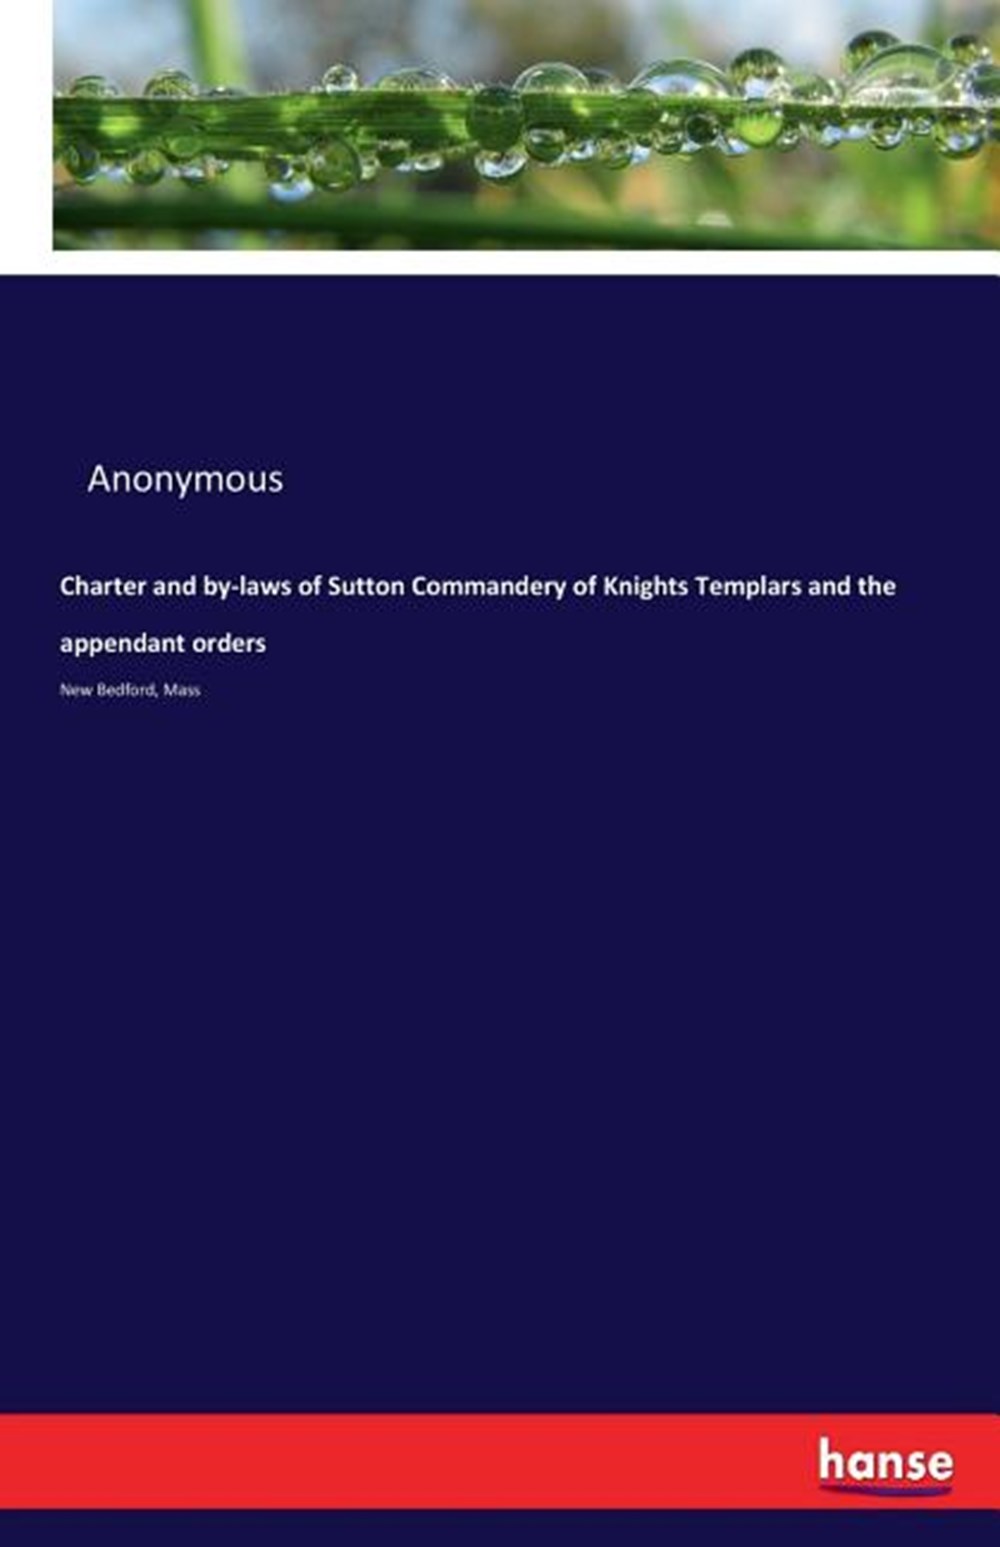 Charter and by-laws of Sutton Commandery of Knights Templars and the appendant orders New Bedford, M